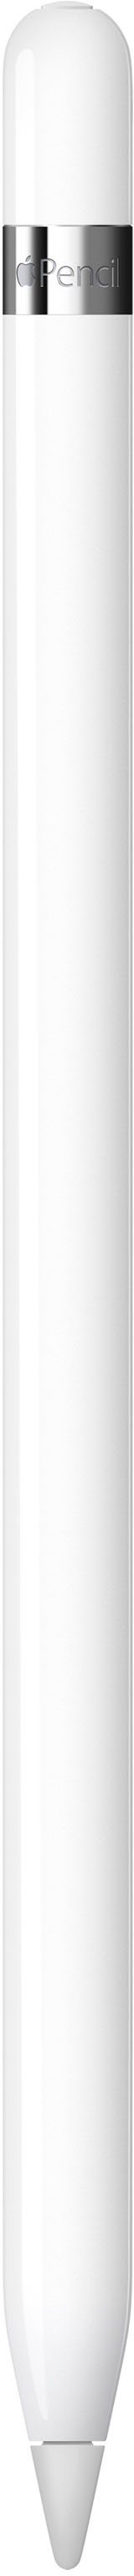 Apple Pencil (1st Generation) with USB-C to Pencil Adapter White MQLY3AM/A  - Best Buy